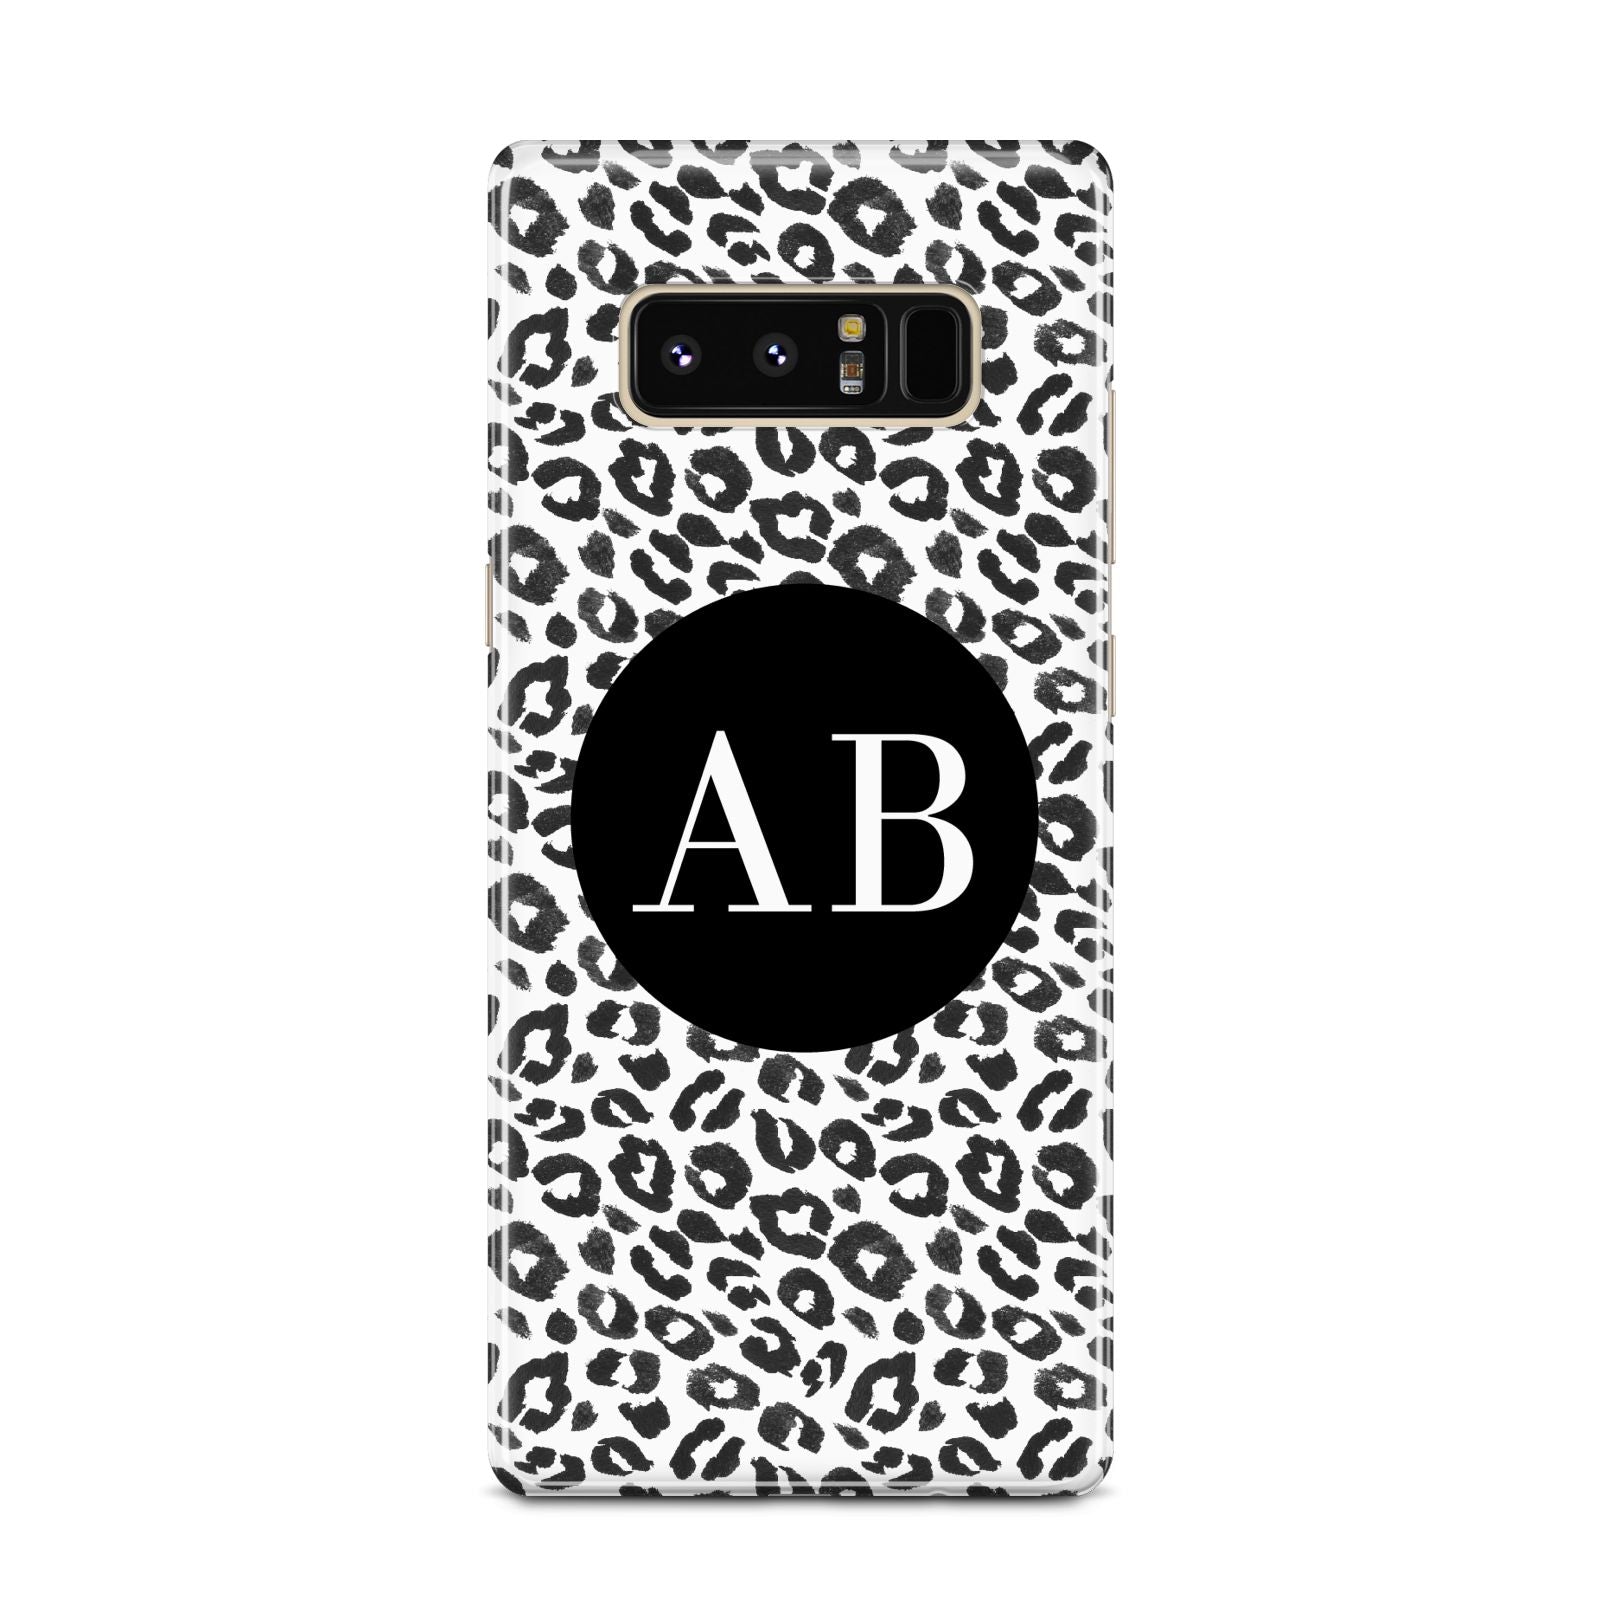 Leopard Print Black and White Samsung Galaxy Note 8 Case